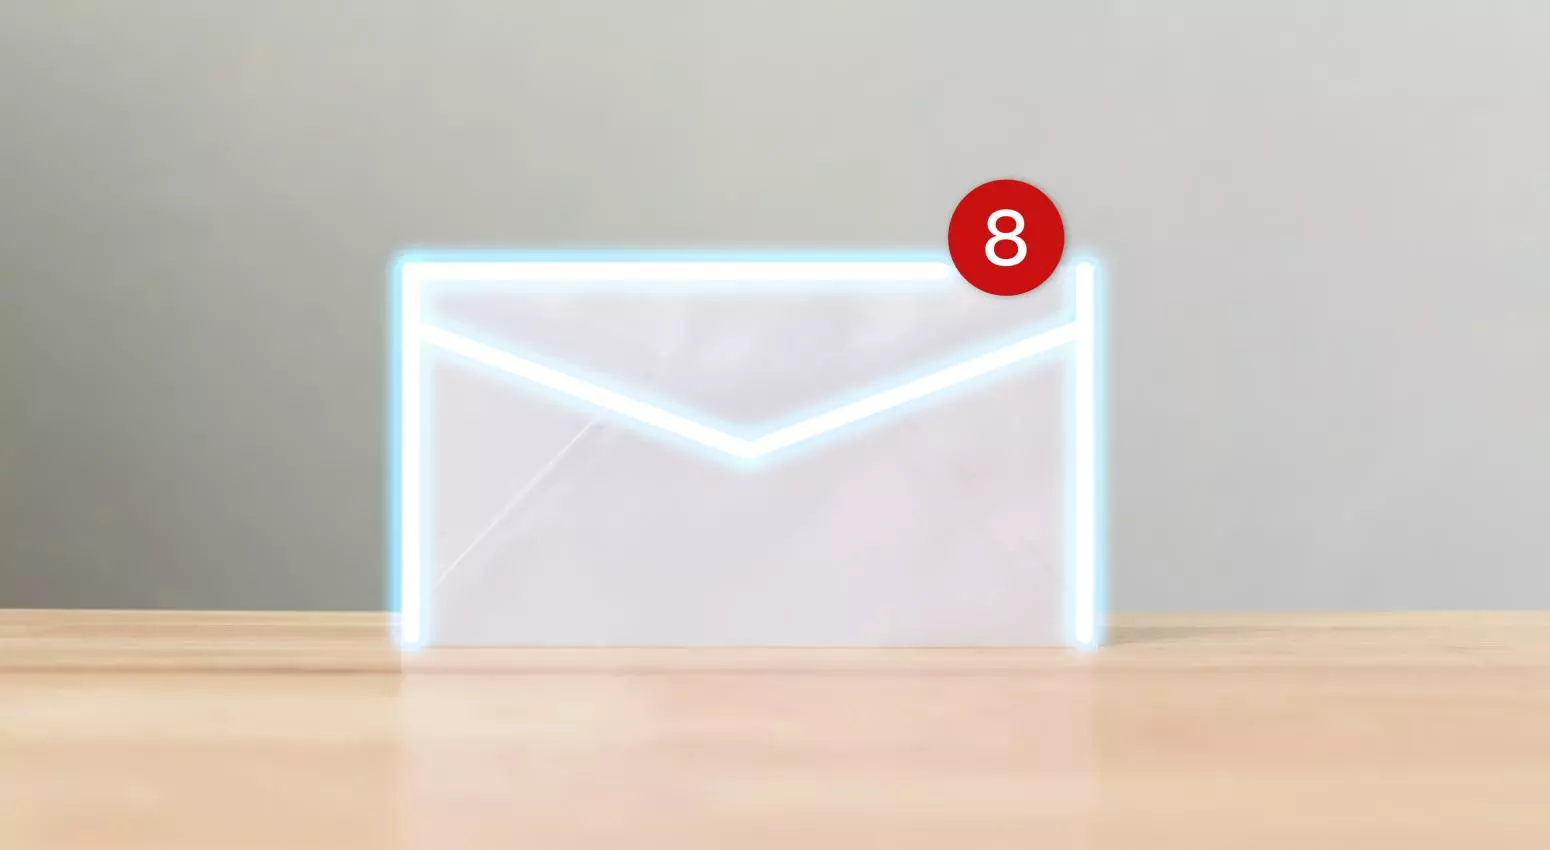 What's the difference between a P.O. Box and a virtual mailbox?